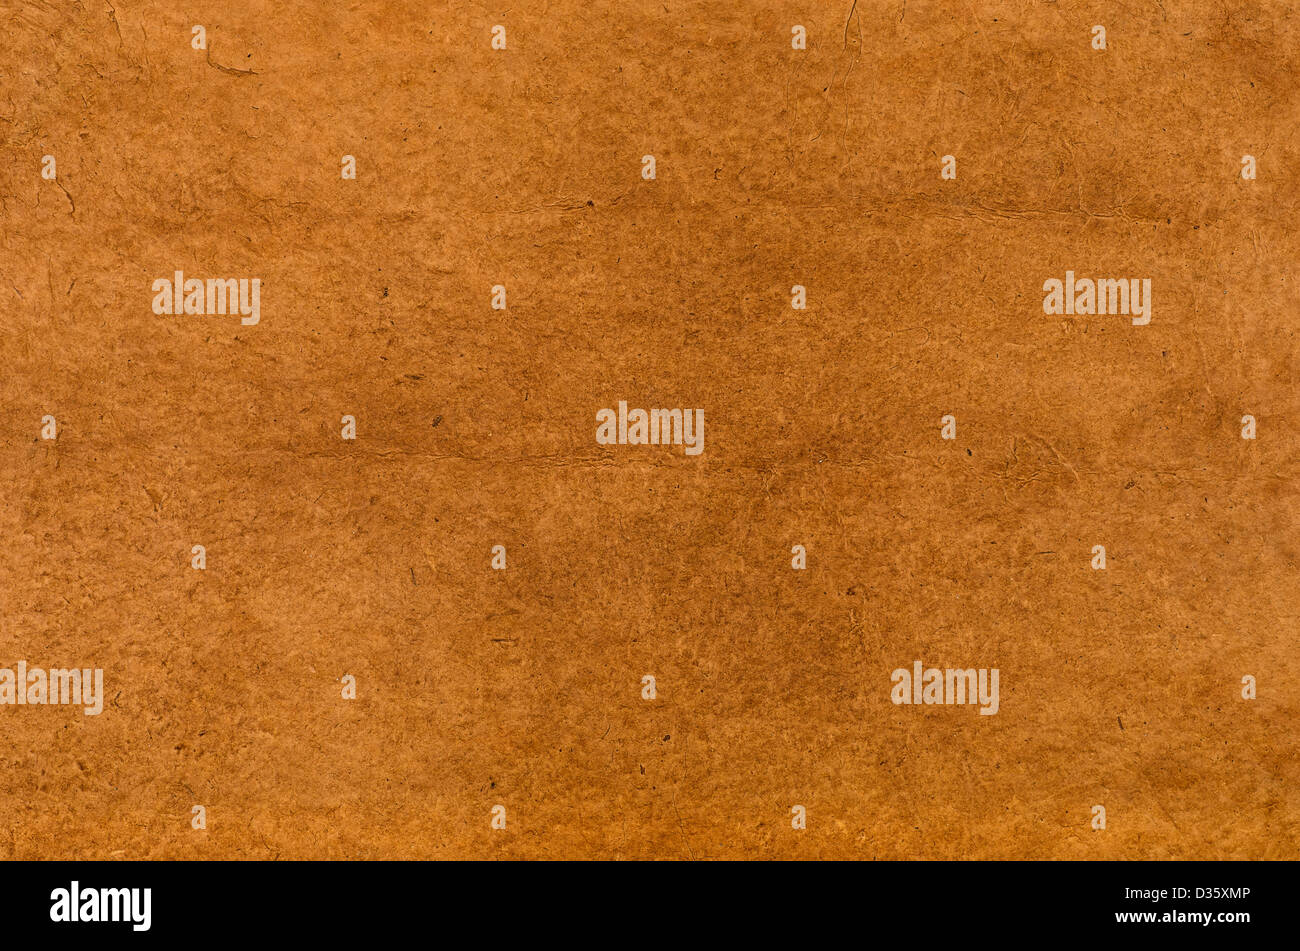 brown daphnepaper with leathery texture Stock Photo